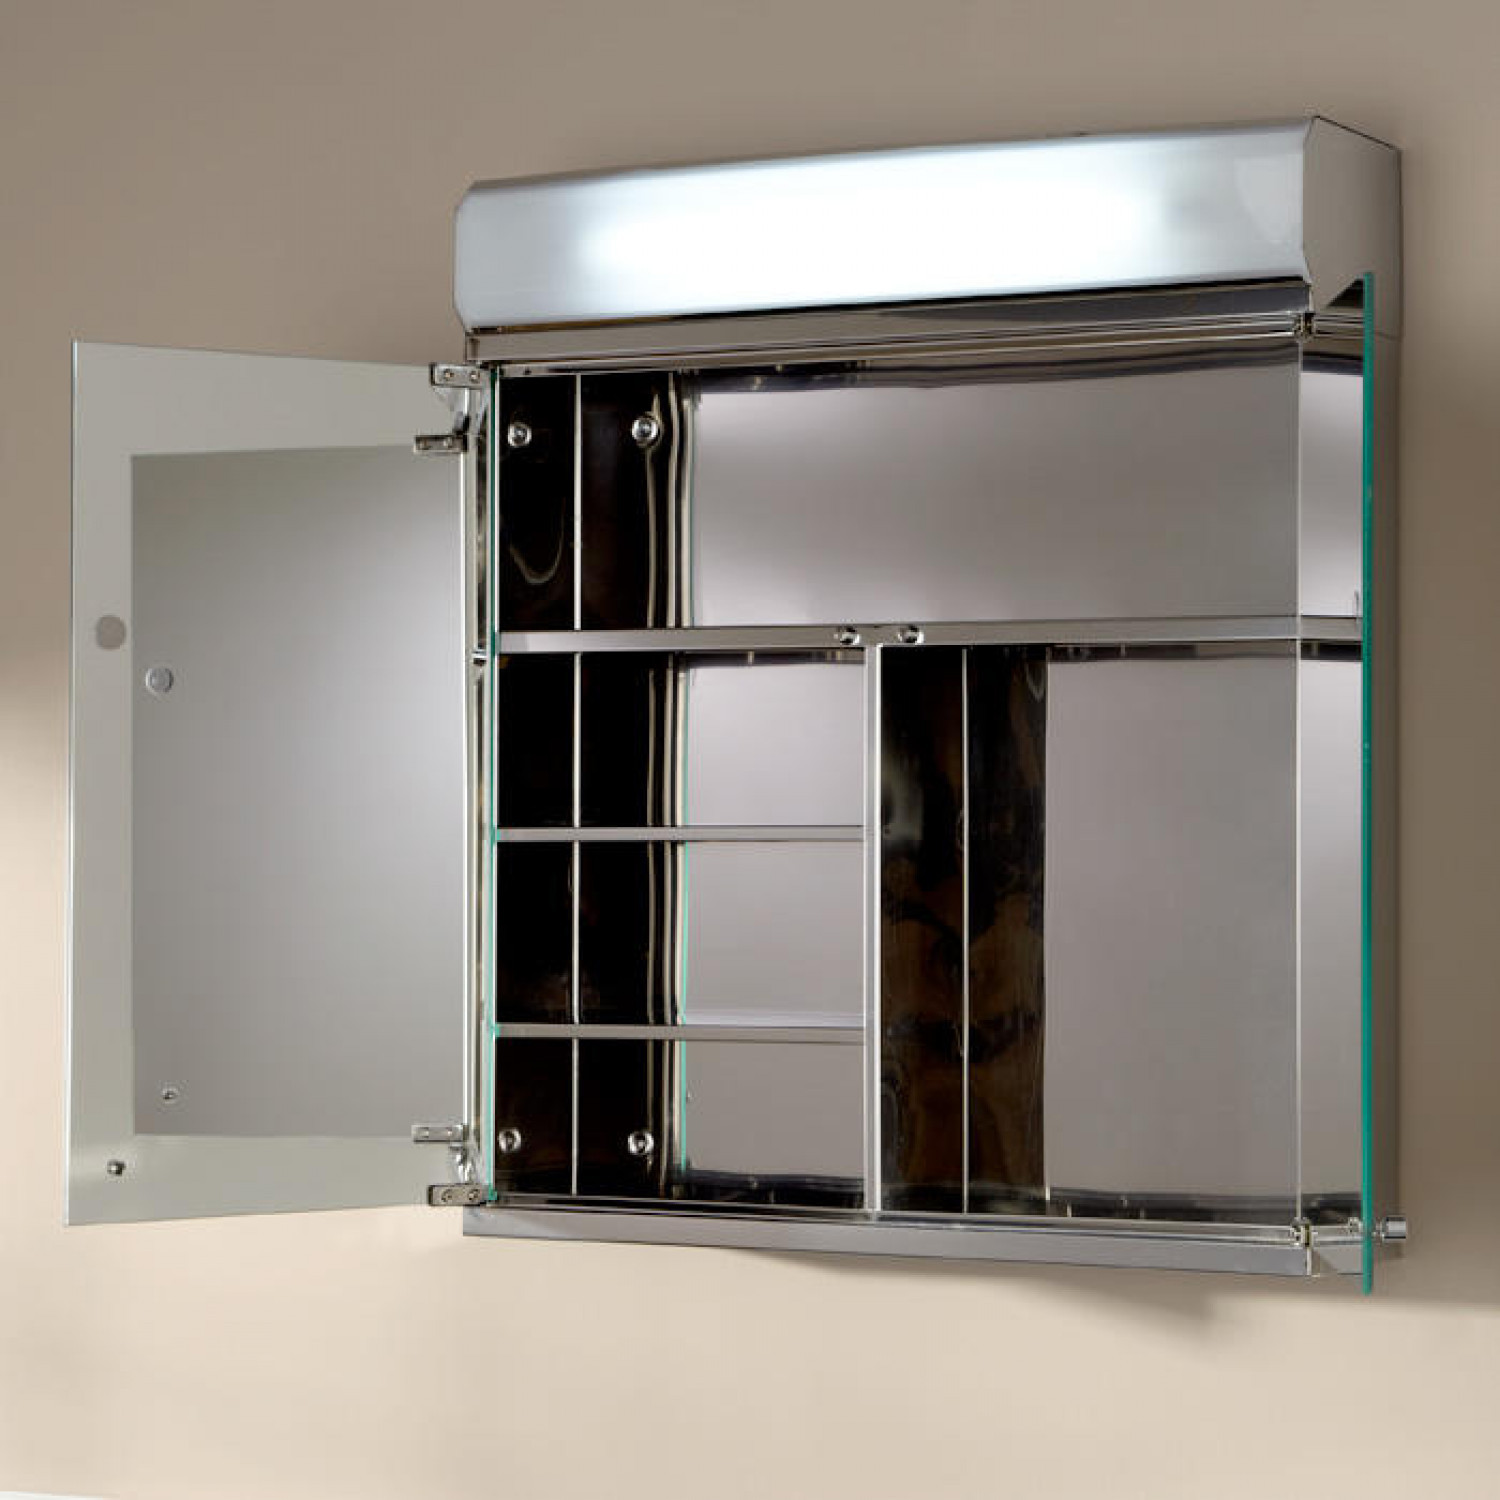 Bathroom Medicine Cabinets With Lights
 Delview Stainless Steel Medicine Cabinet with Lighted